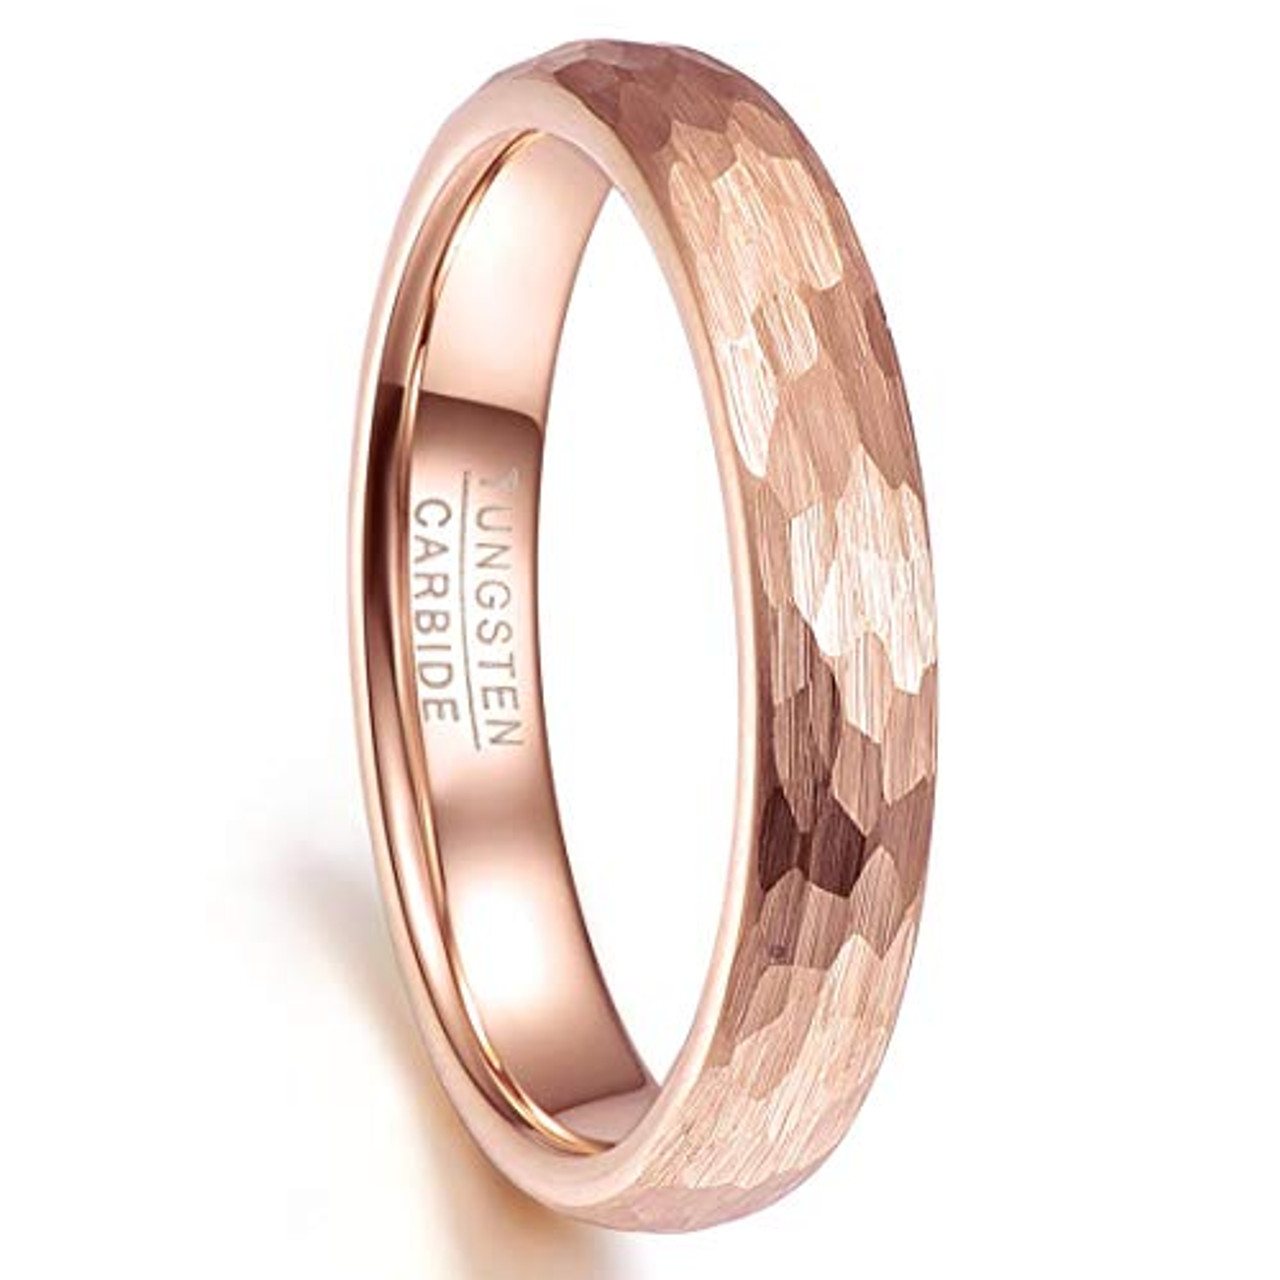 (4mm)  Unisex or Women's Tungsten Carbide Wedding ring bands. Rose Gold Hammered Domed Top Comfort Fit Wedding Ring.